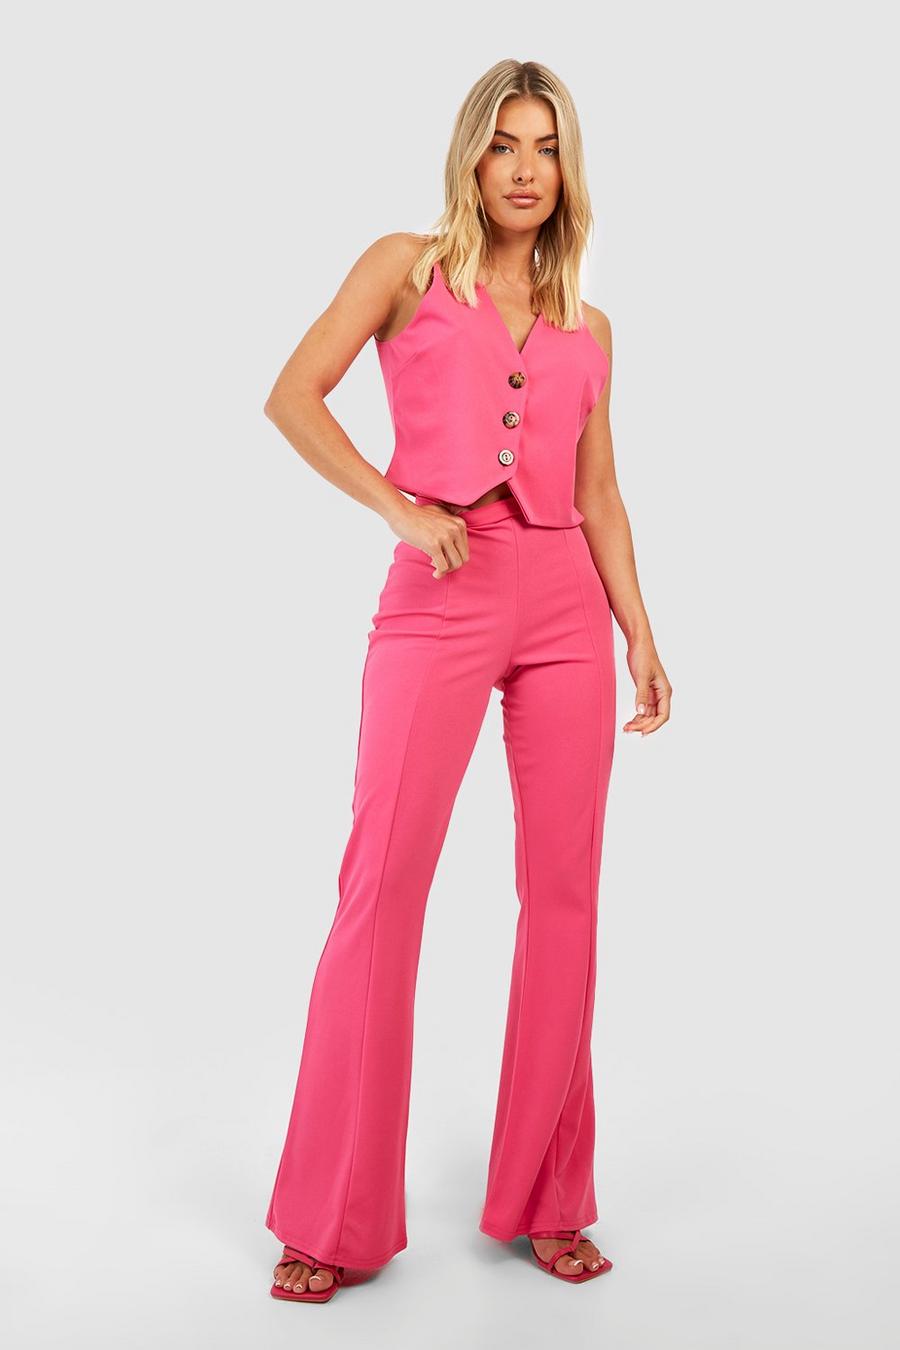 Hot pink Crepe Fit & Flare Pants